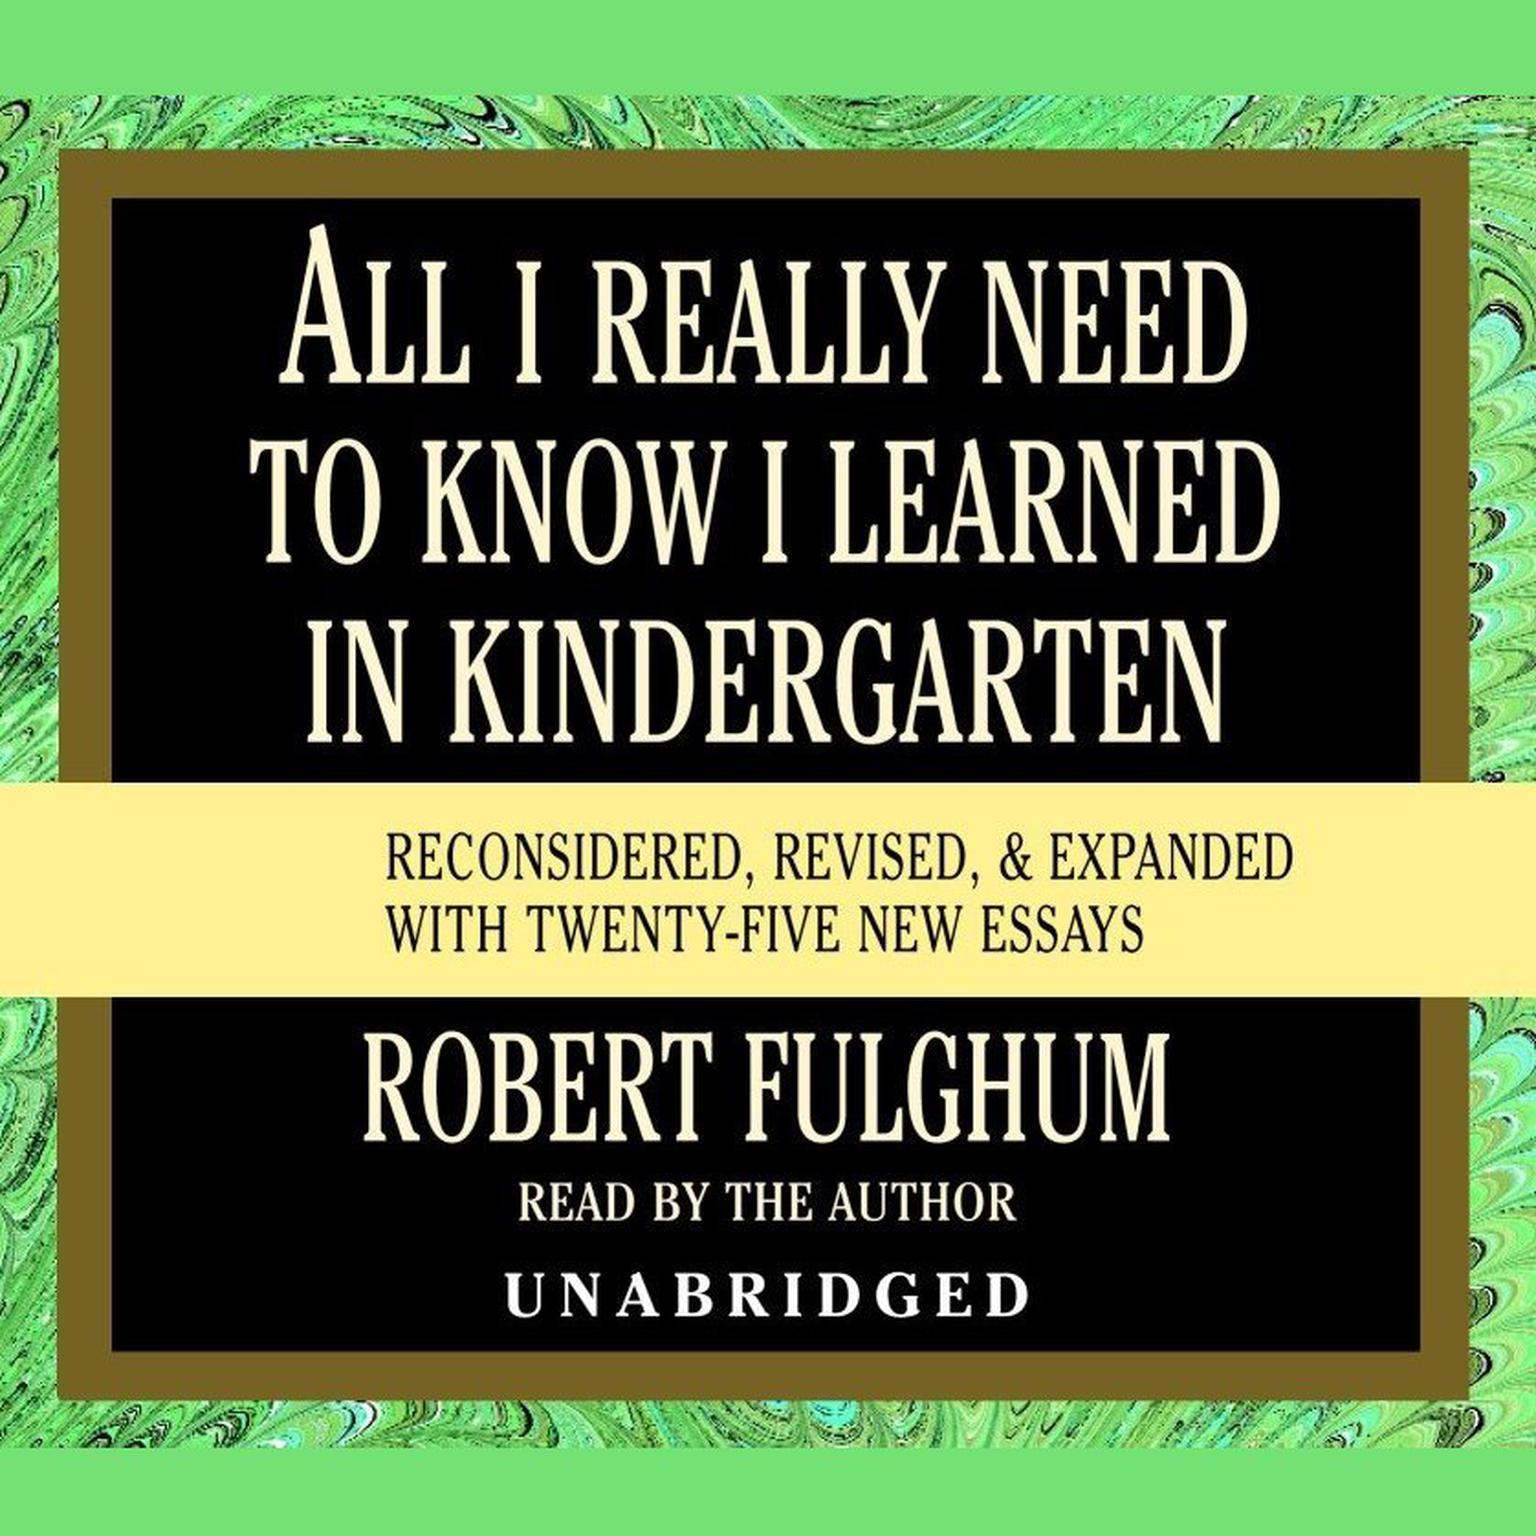 All I Really Need to Know I Learned in Kindergarten: Fifteenth Anniversary Edition Reconsidered, Revised, & Expanded With Twenty-Five New Essays Audiobook, by Robert Fulghum